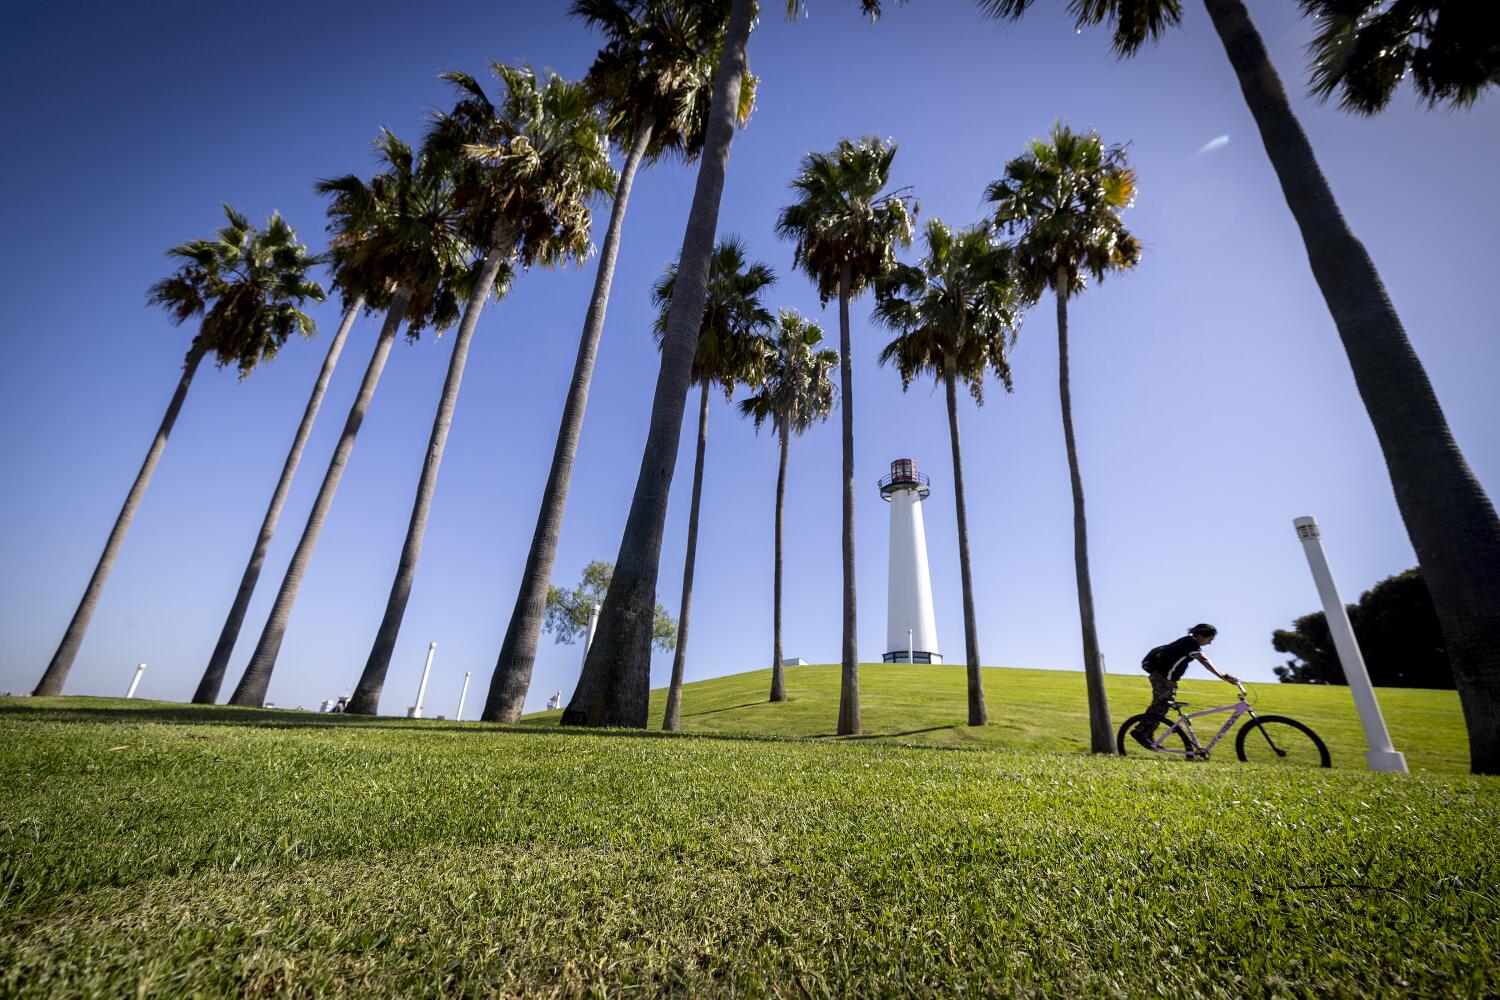 December in California kicks off with 80-degree heat for L.A., rain for the Bay Area